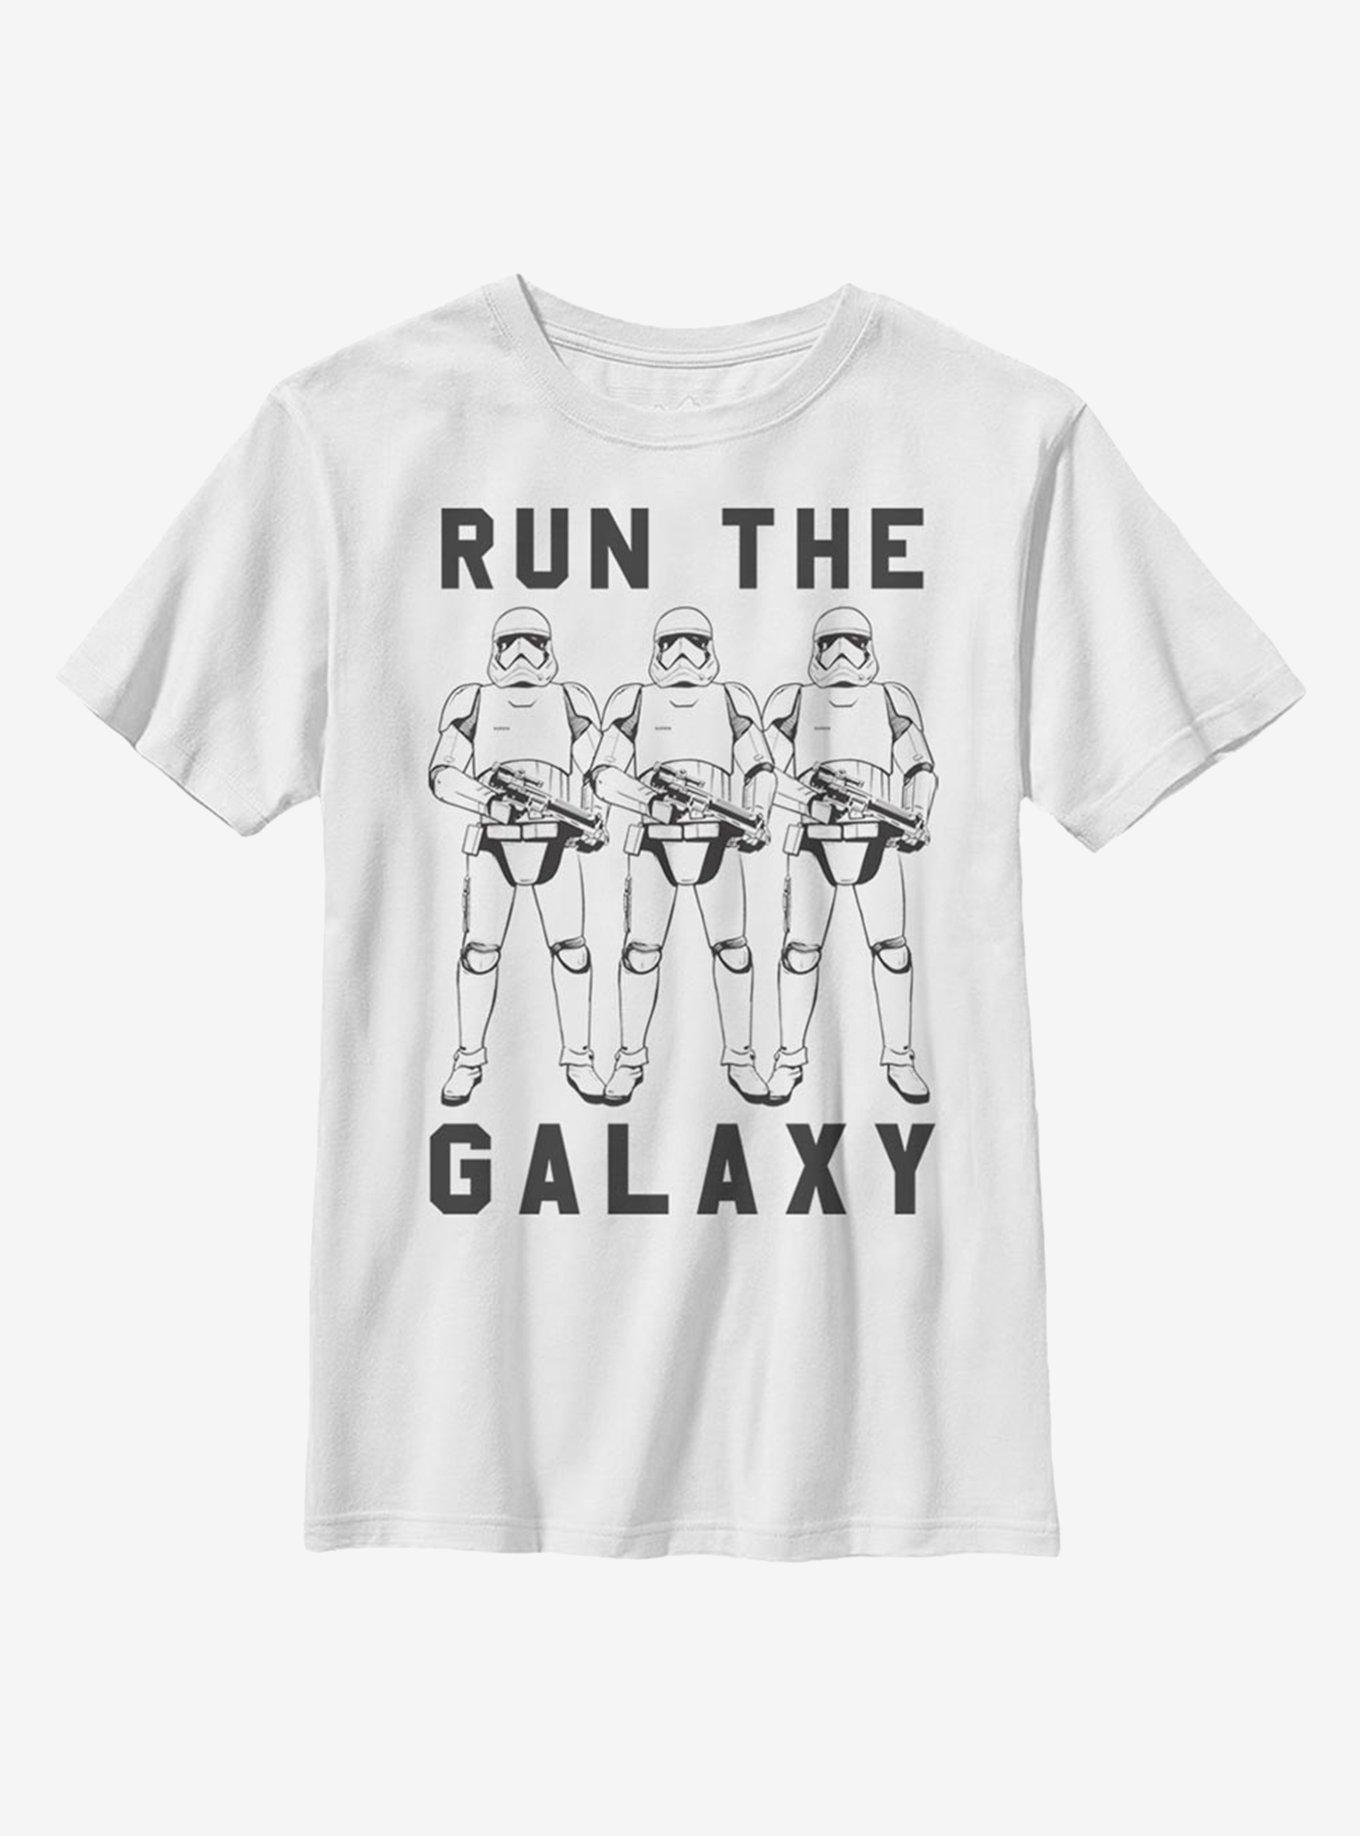 Star Wars Episode VIII: The Last Jedi Trooper Galaxy Youth T-Shirt, WHITE, hi-res